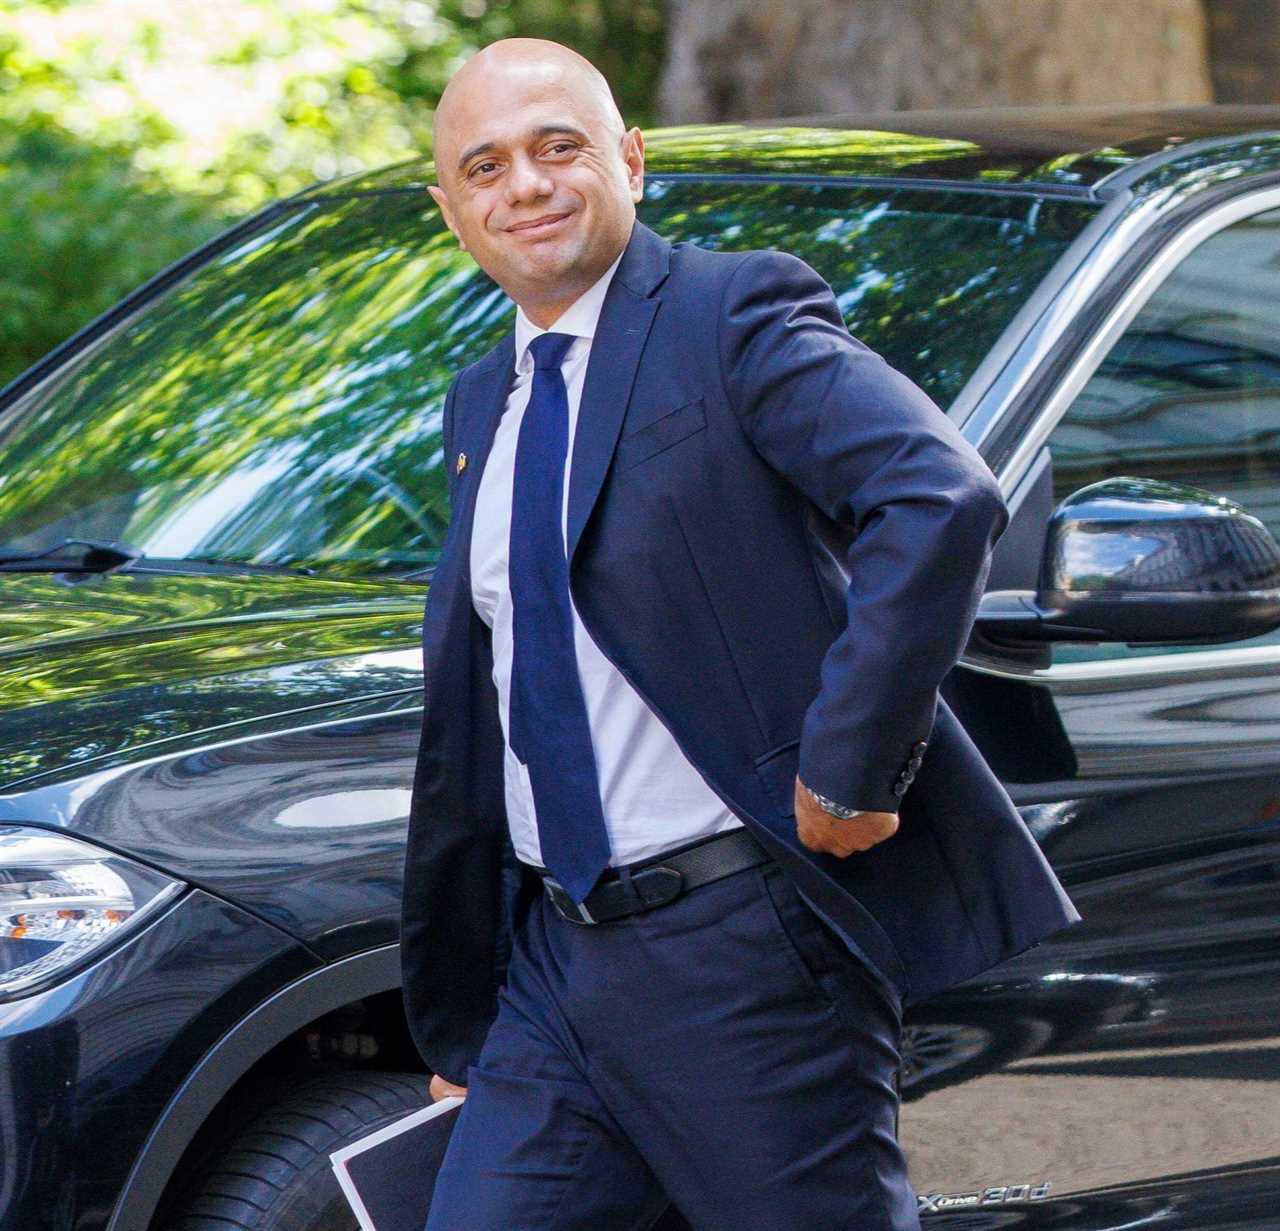 Rishi Sunak and Sajid Javid RESIGN from Cabinet with devastating call for Boris Johnson to quit